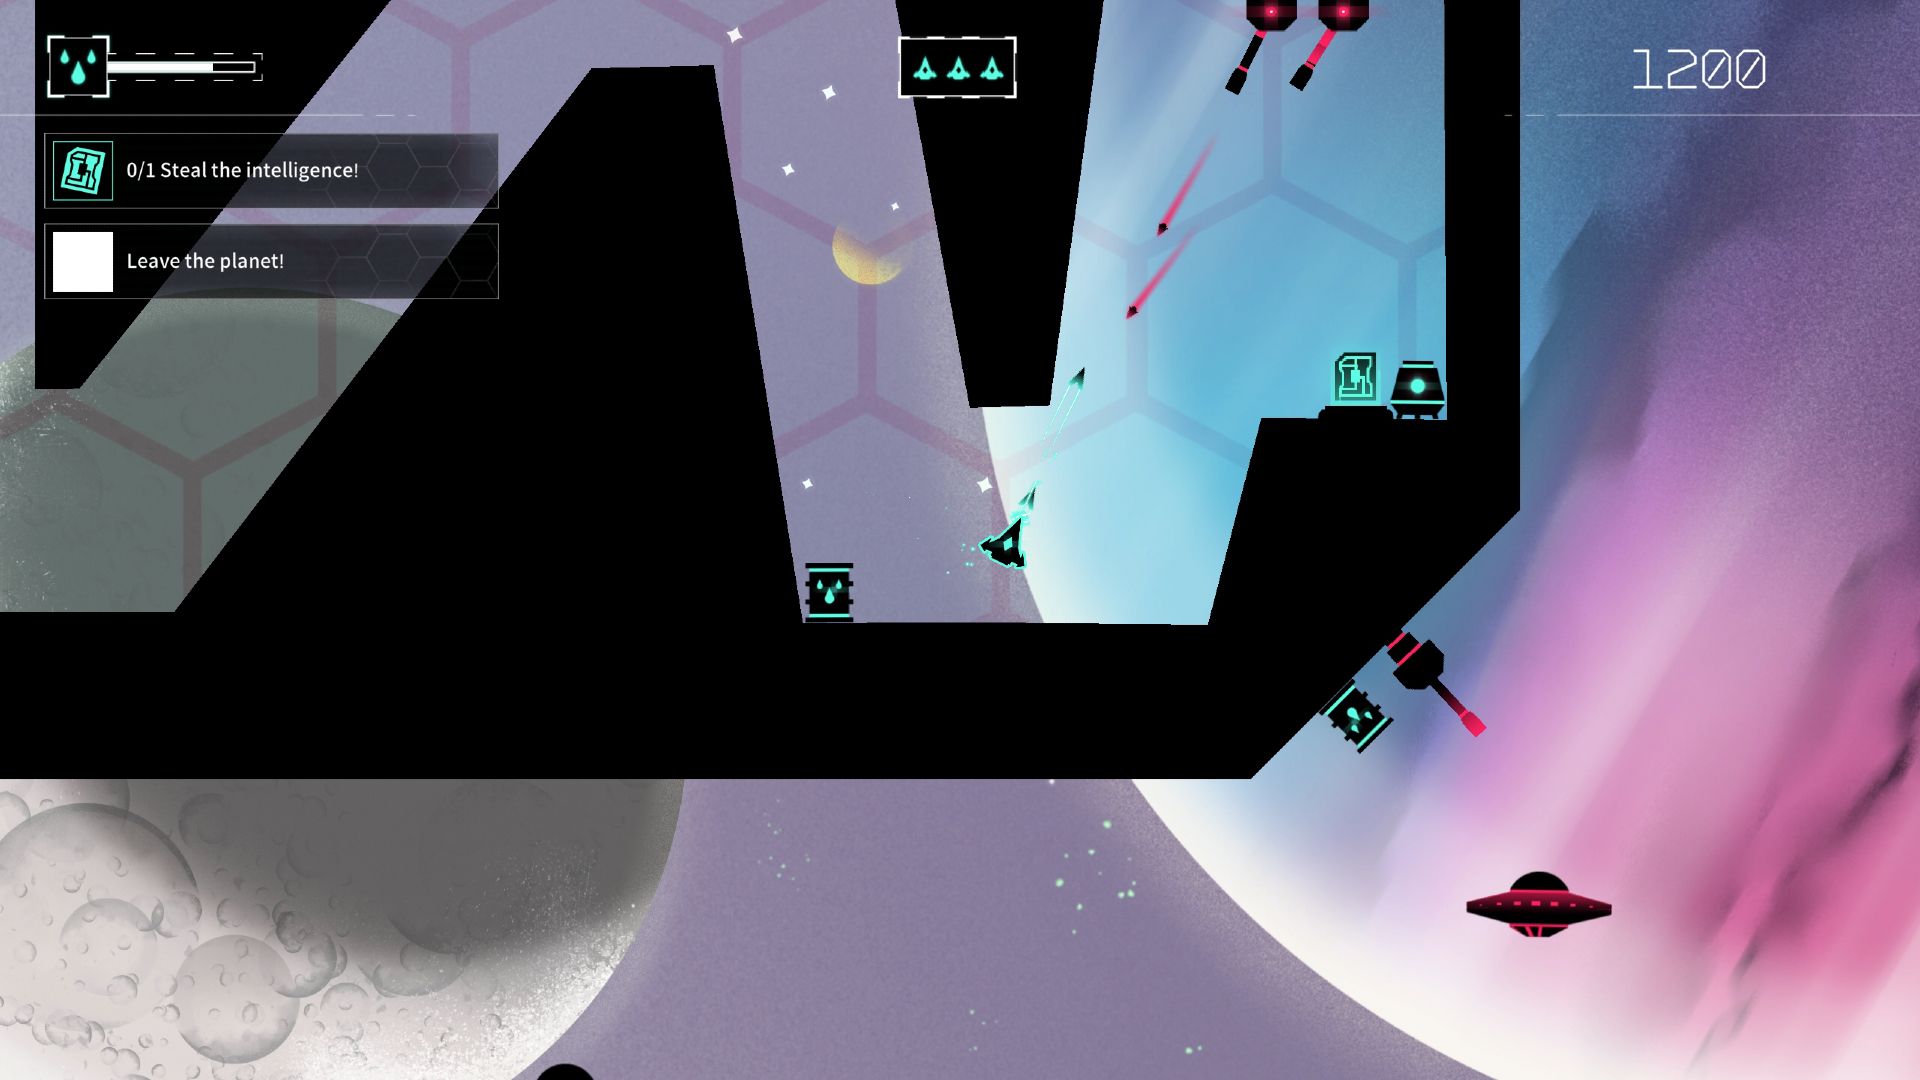 Gravitar: Recharged abandons the original's vector graphics and features an original score from composer Megan McDuffee